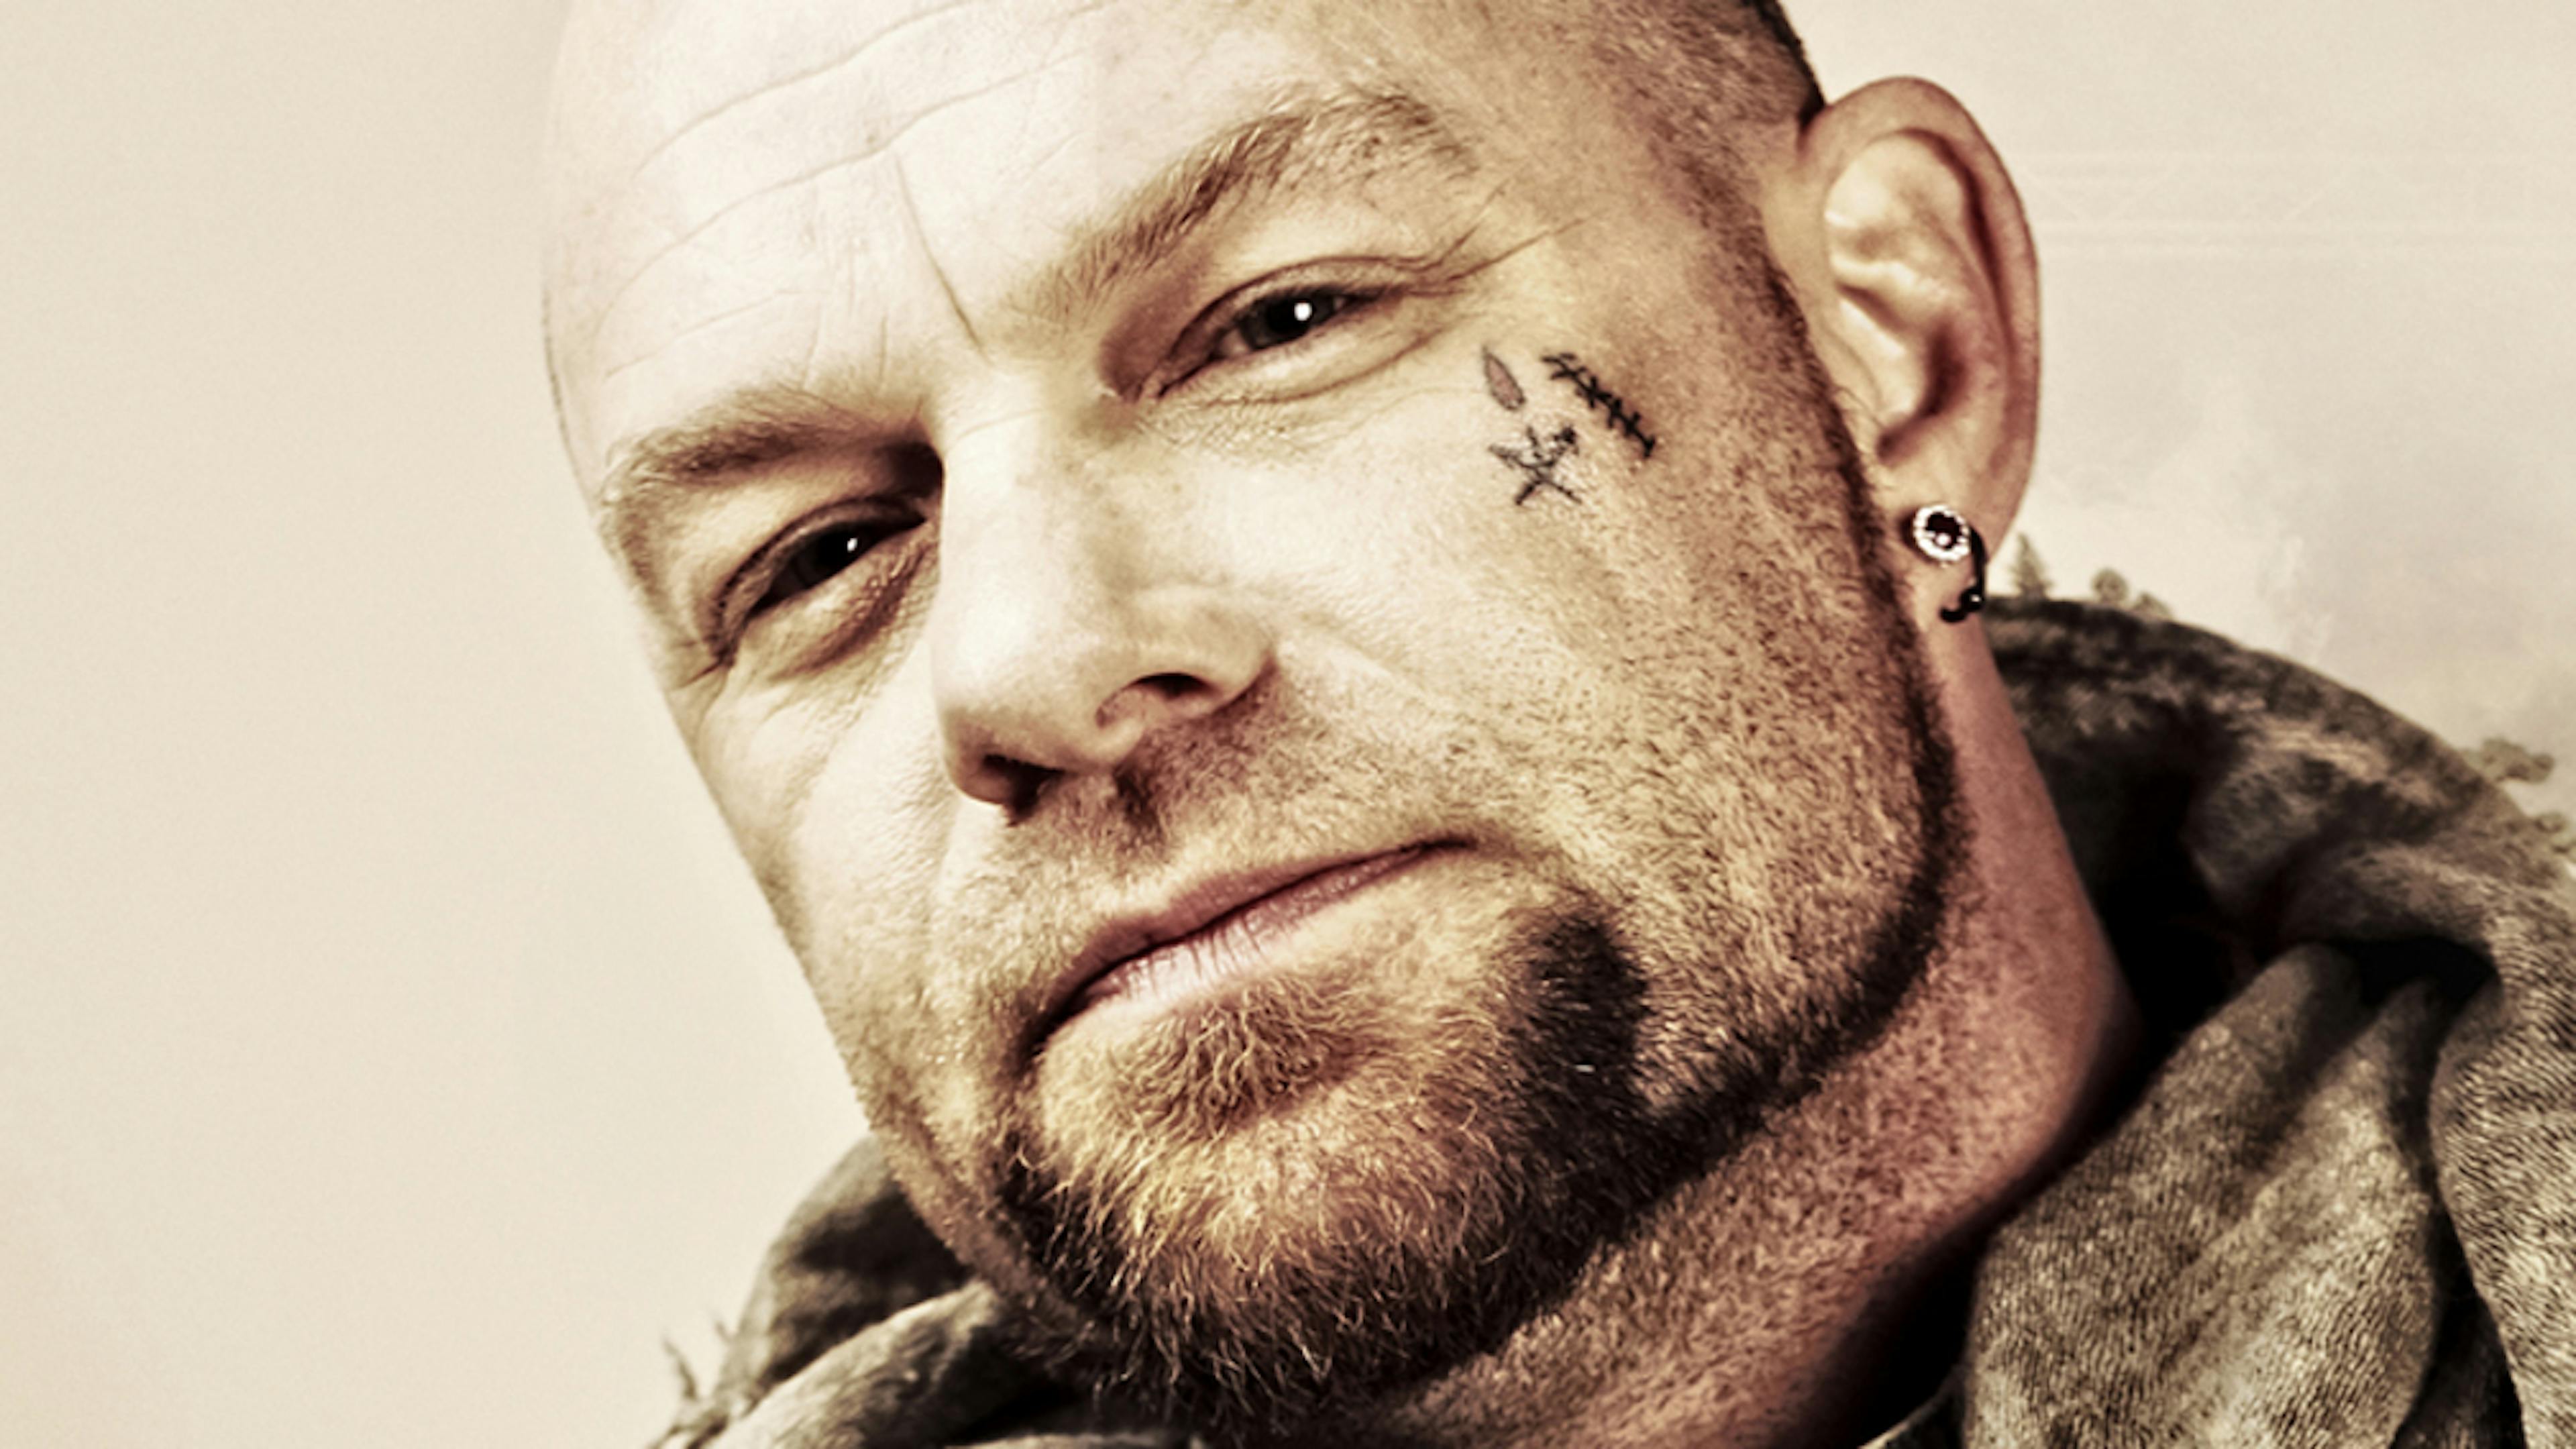 Five Finger Death Punch’s Ivan Moody Launches Moody’s Medicinals CBD Products